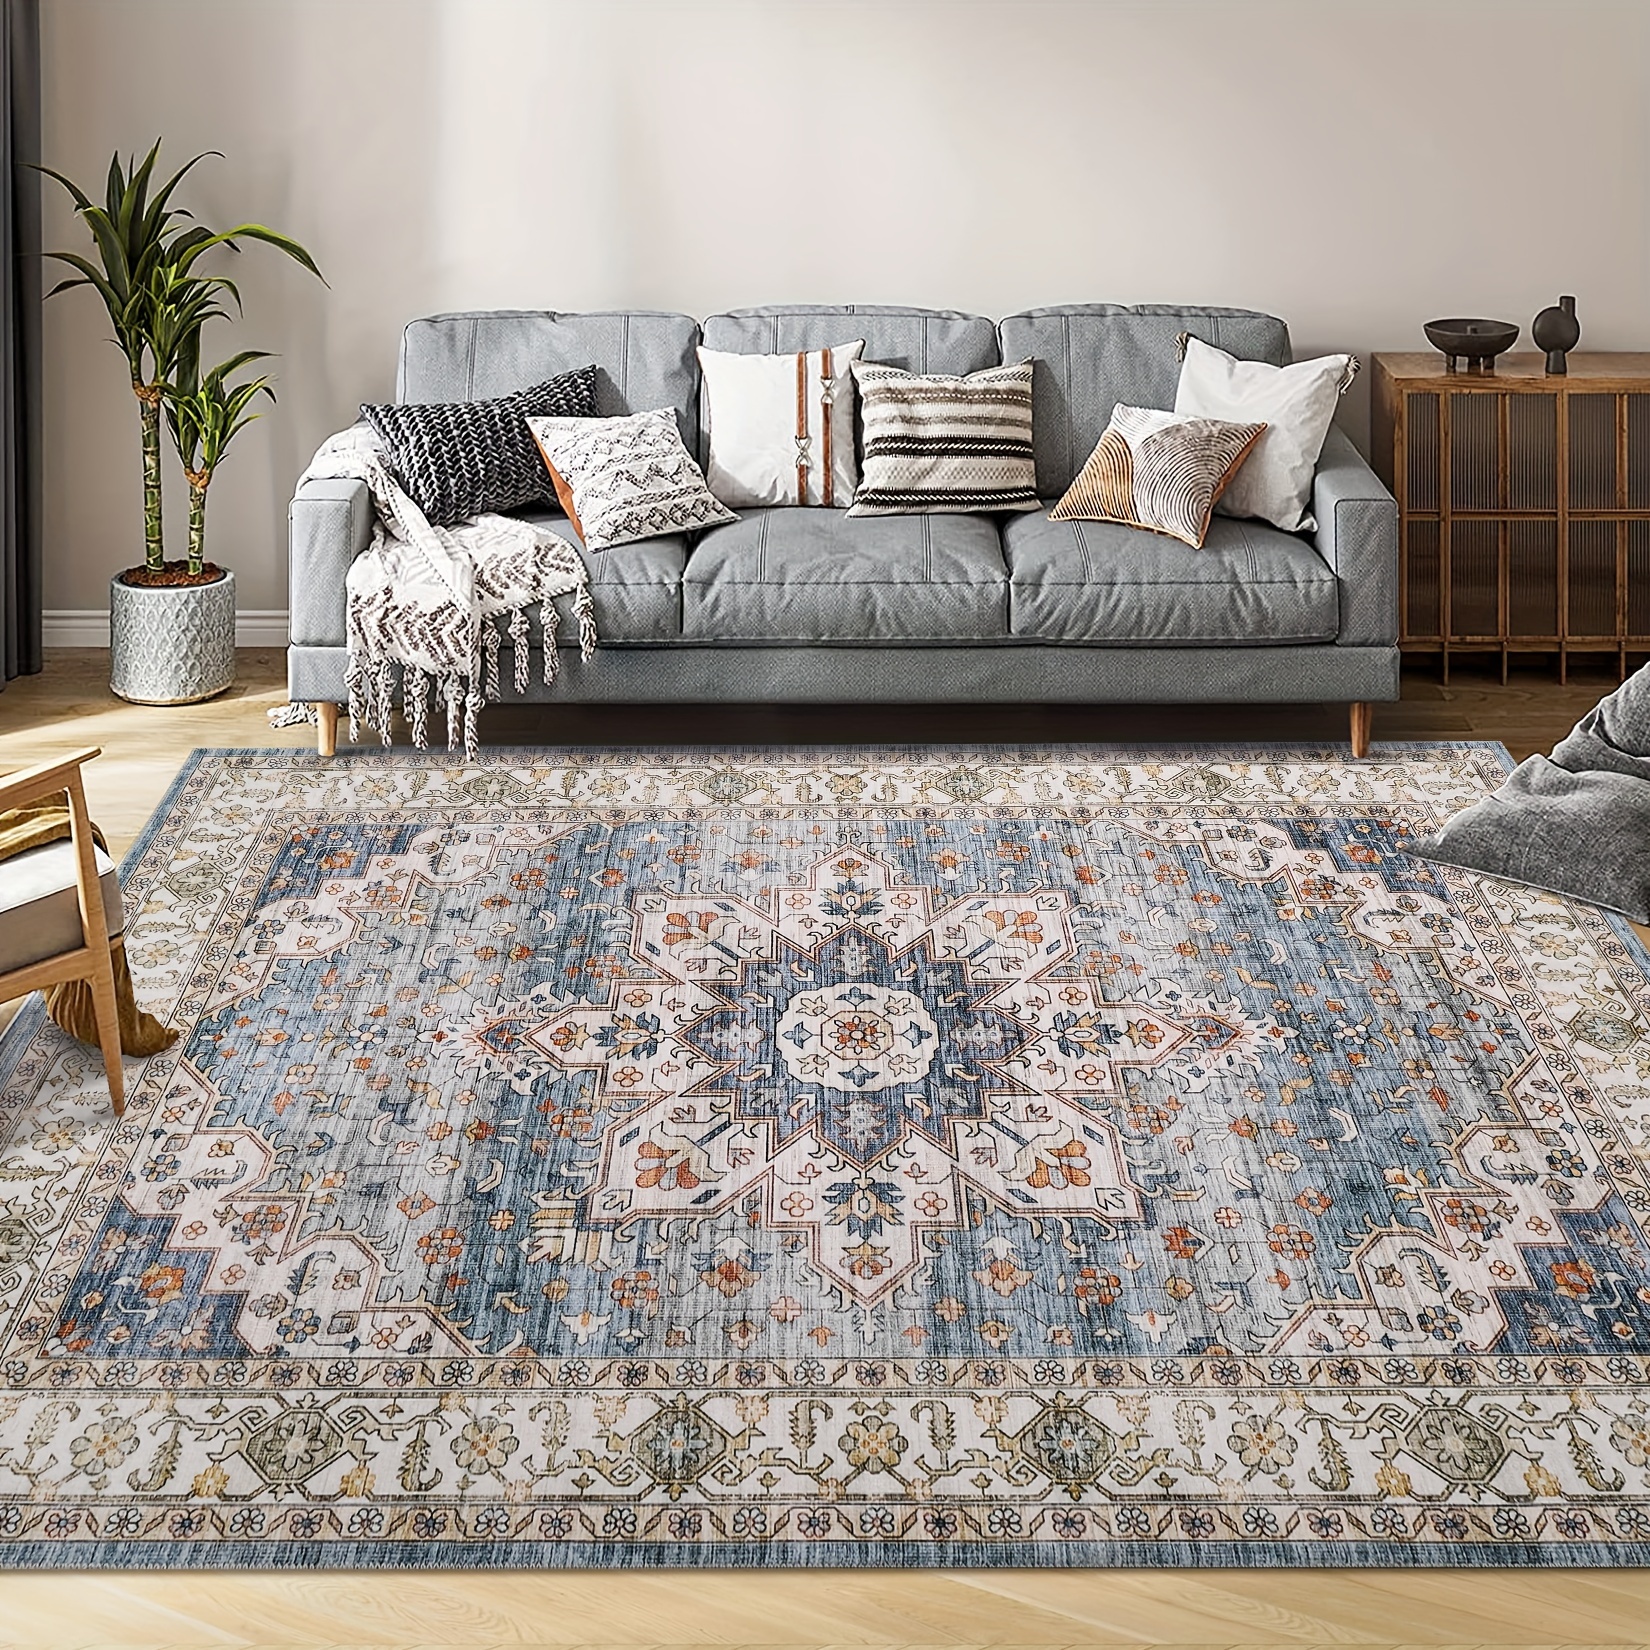 

Ultra-thin Washable Vintage Area Rugs - Large Rugs For Living Room Stain Resistant Carpet For Bedroom With Non Slip Backing Home Decor Floor Decoration Mat